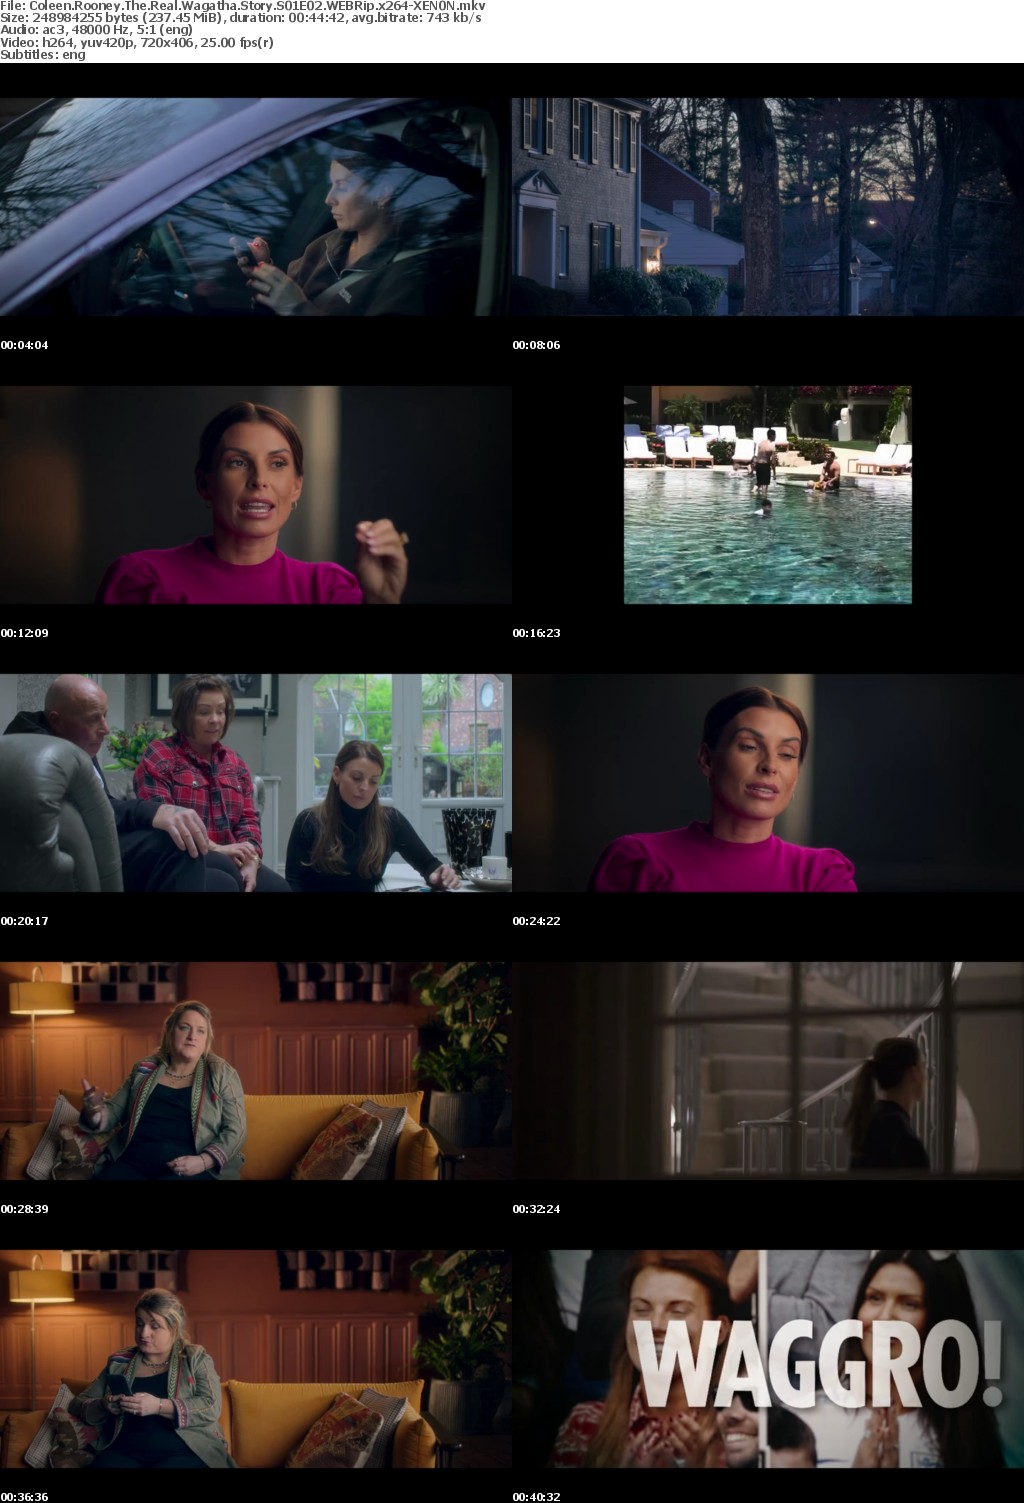 Coleen Rooney The Real Wagatha Story S01E02 WEBRip x264-XEN0N Saturn5